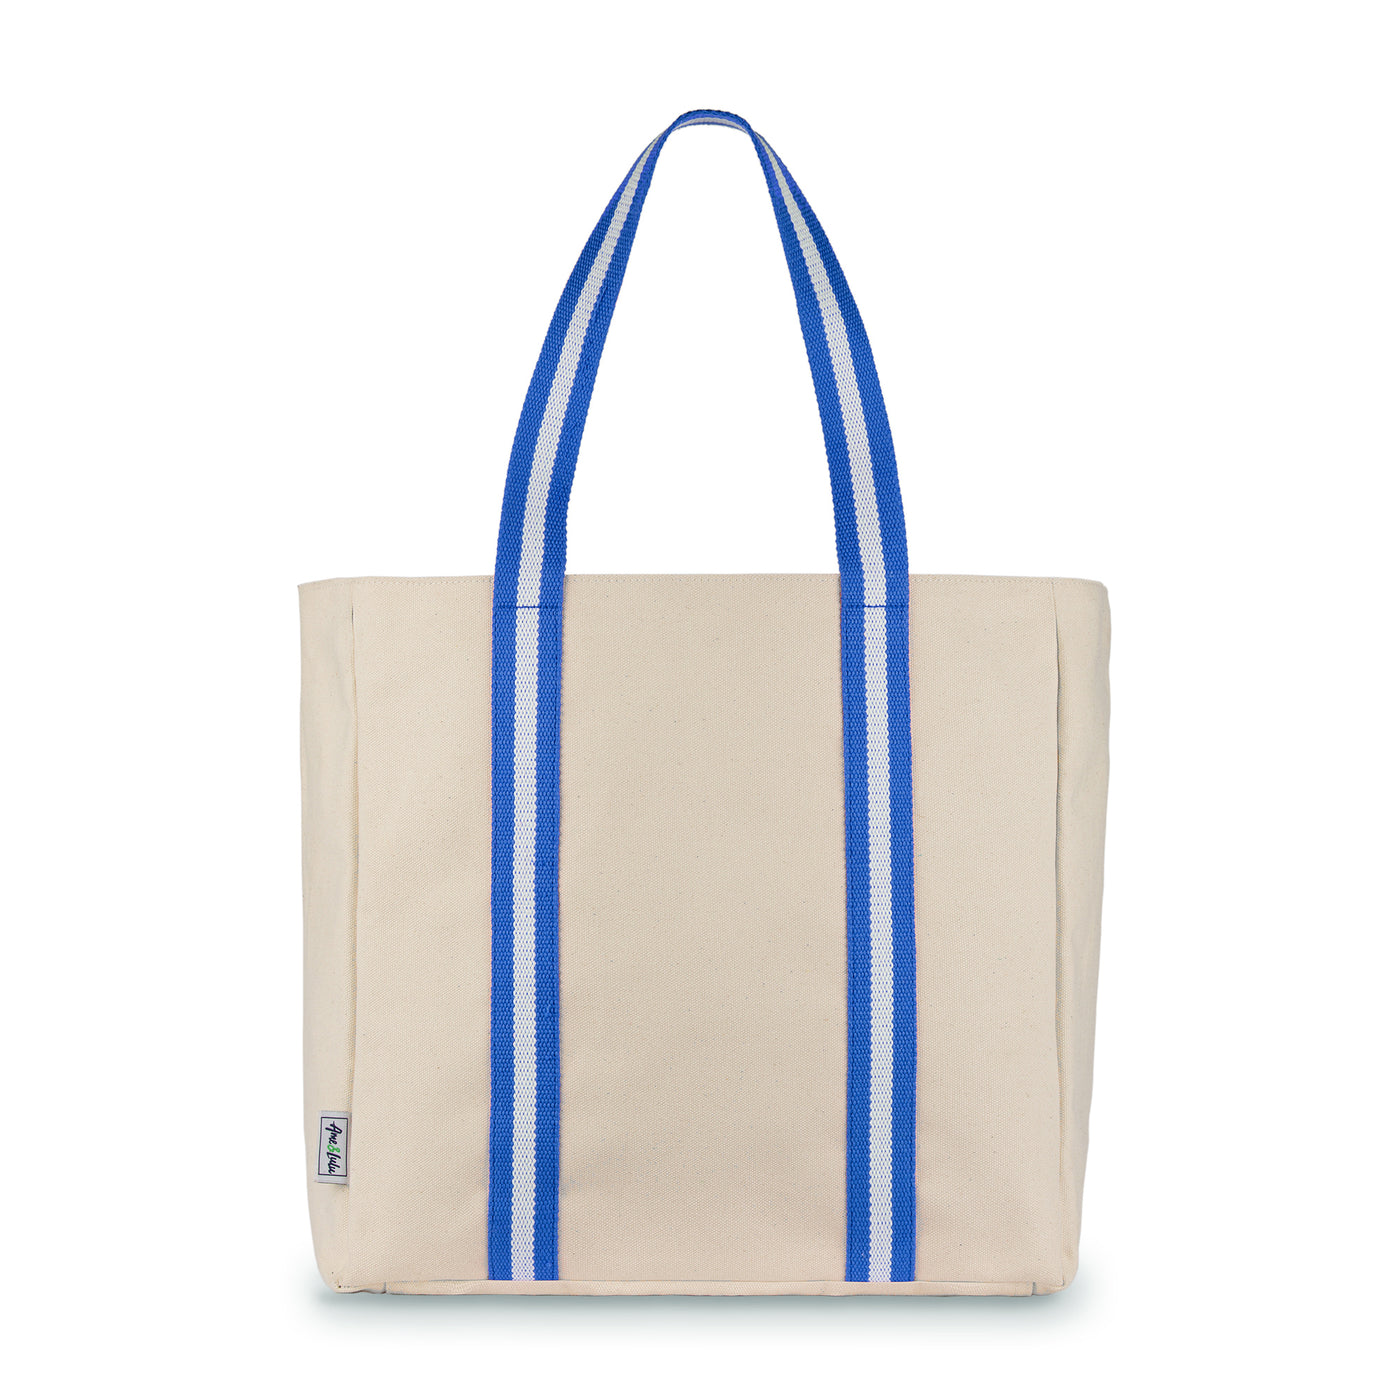 natural canvas tote with blue and white cotton webbing straps